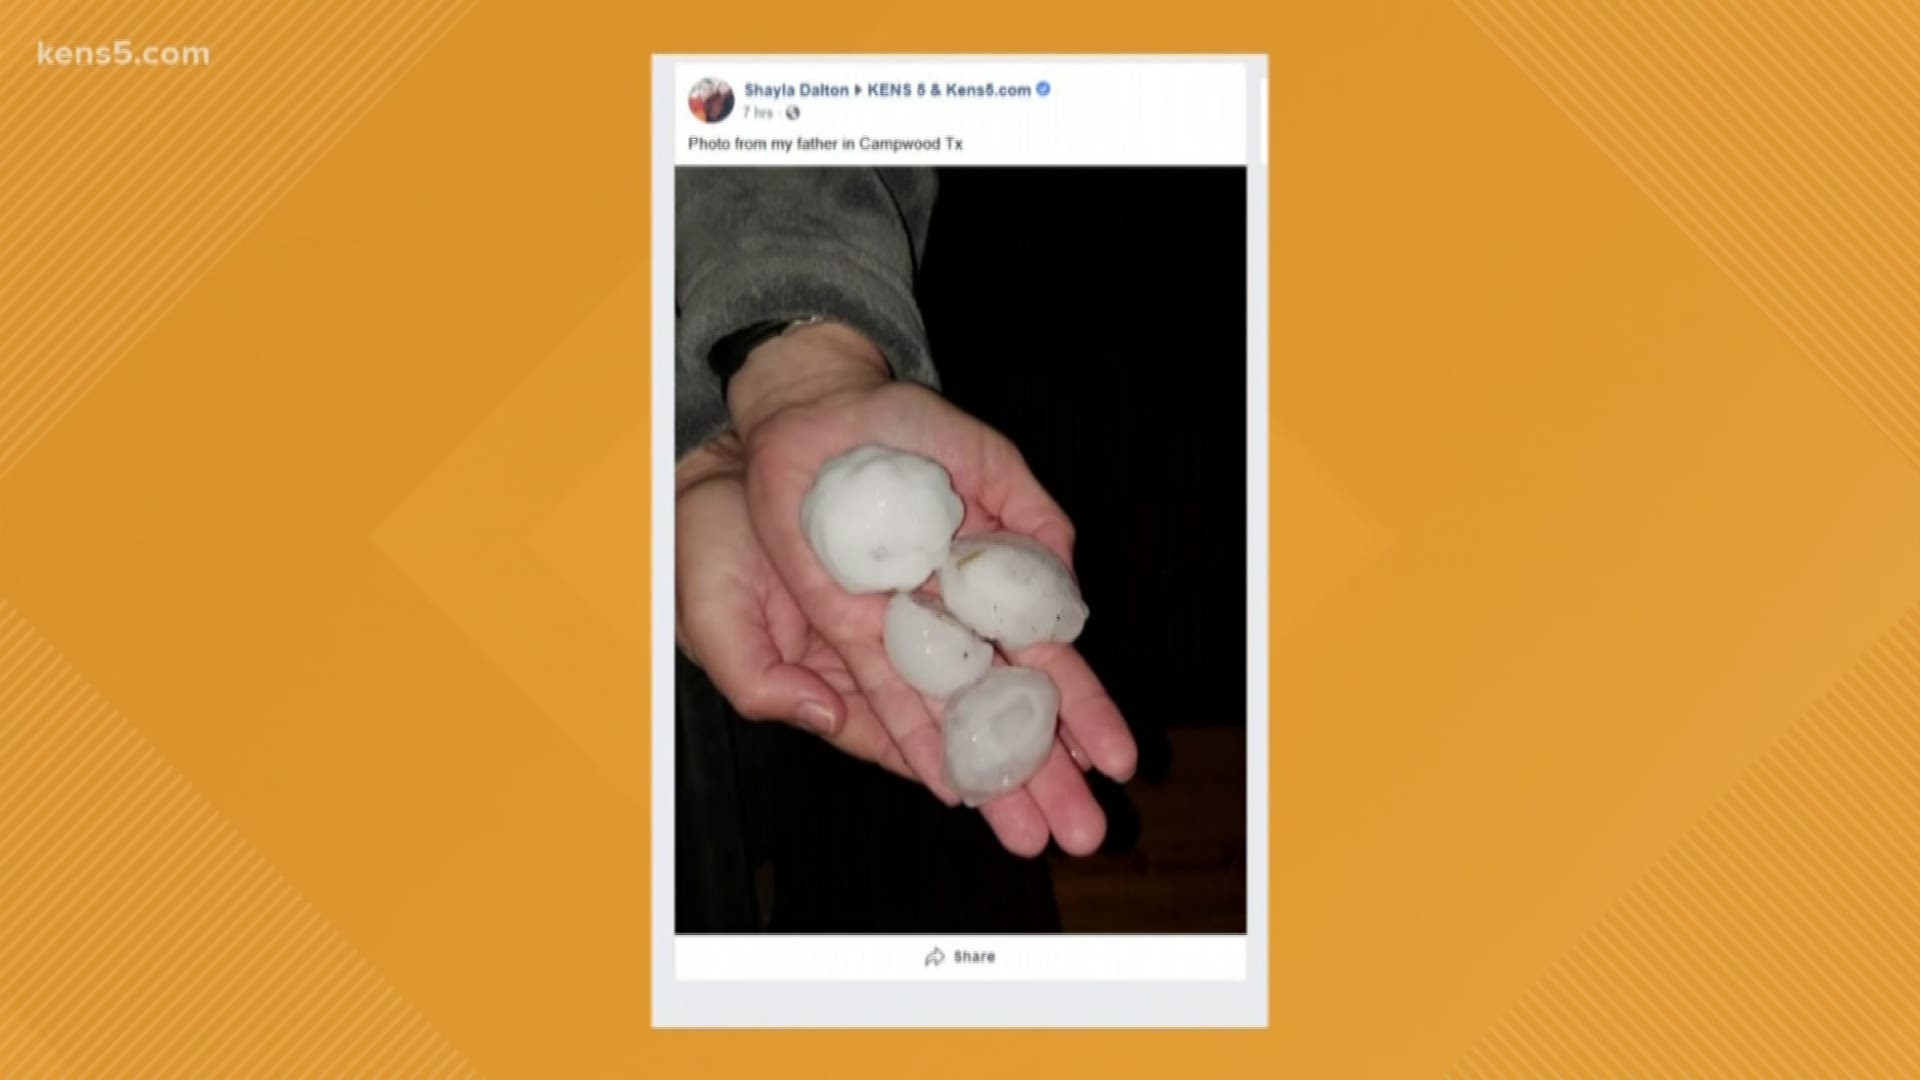 The weather has died down by Thursday morning, but some parts of the area saw hail late Wednesday night.